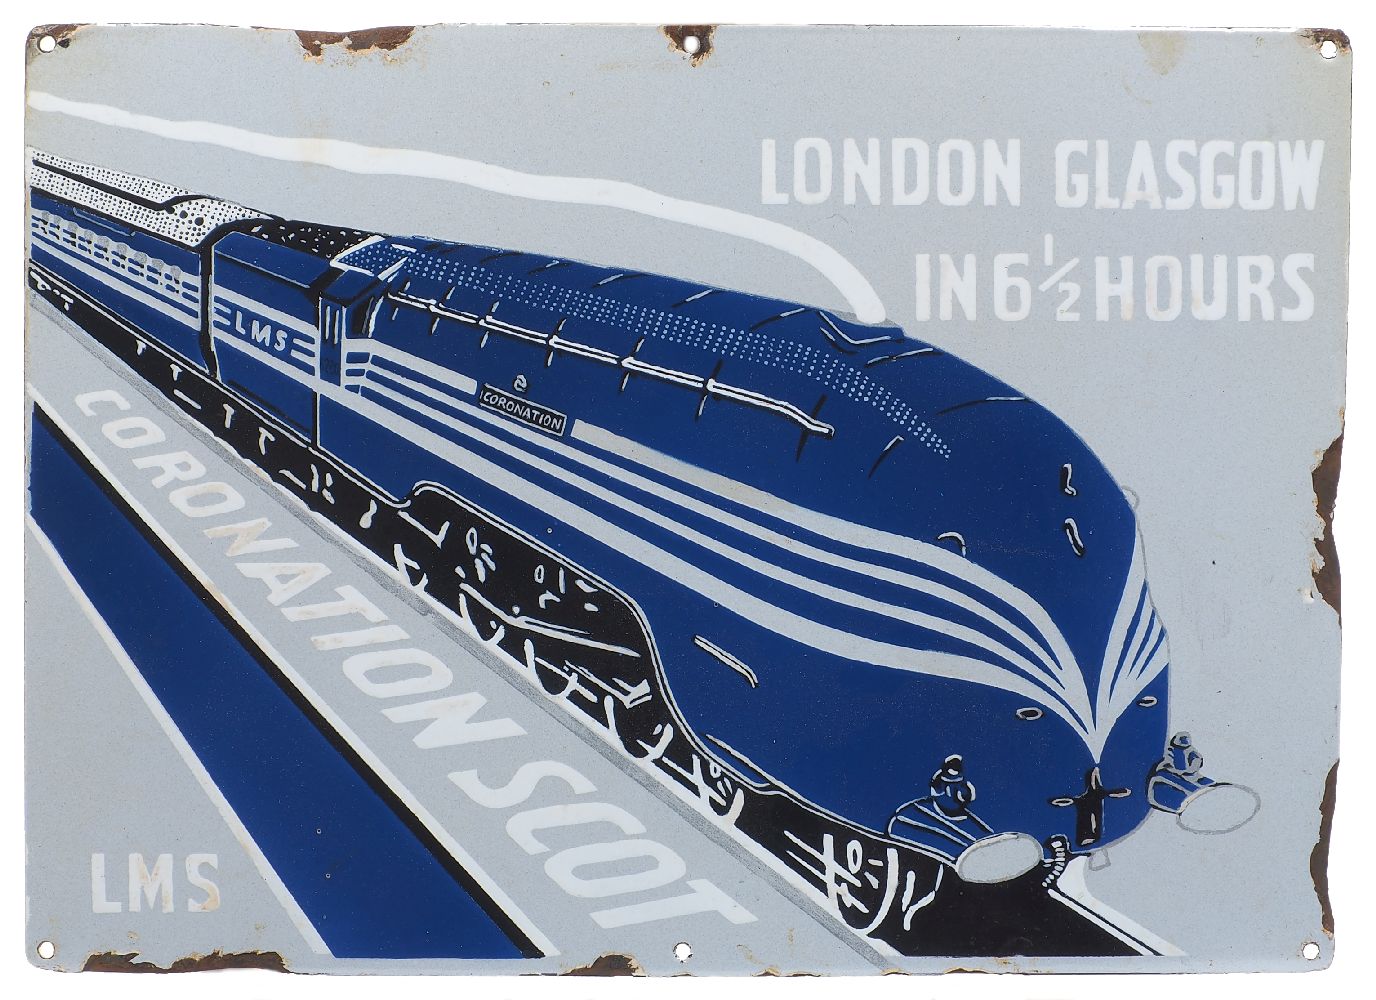 An enamel advertising sign for the London Midland and Scottish Railway 'Coronation Scot' express